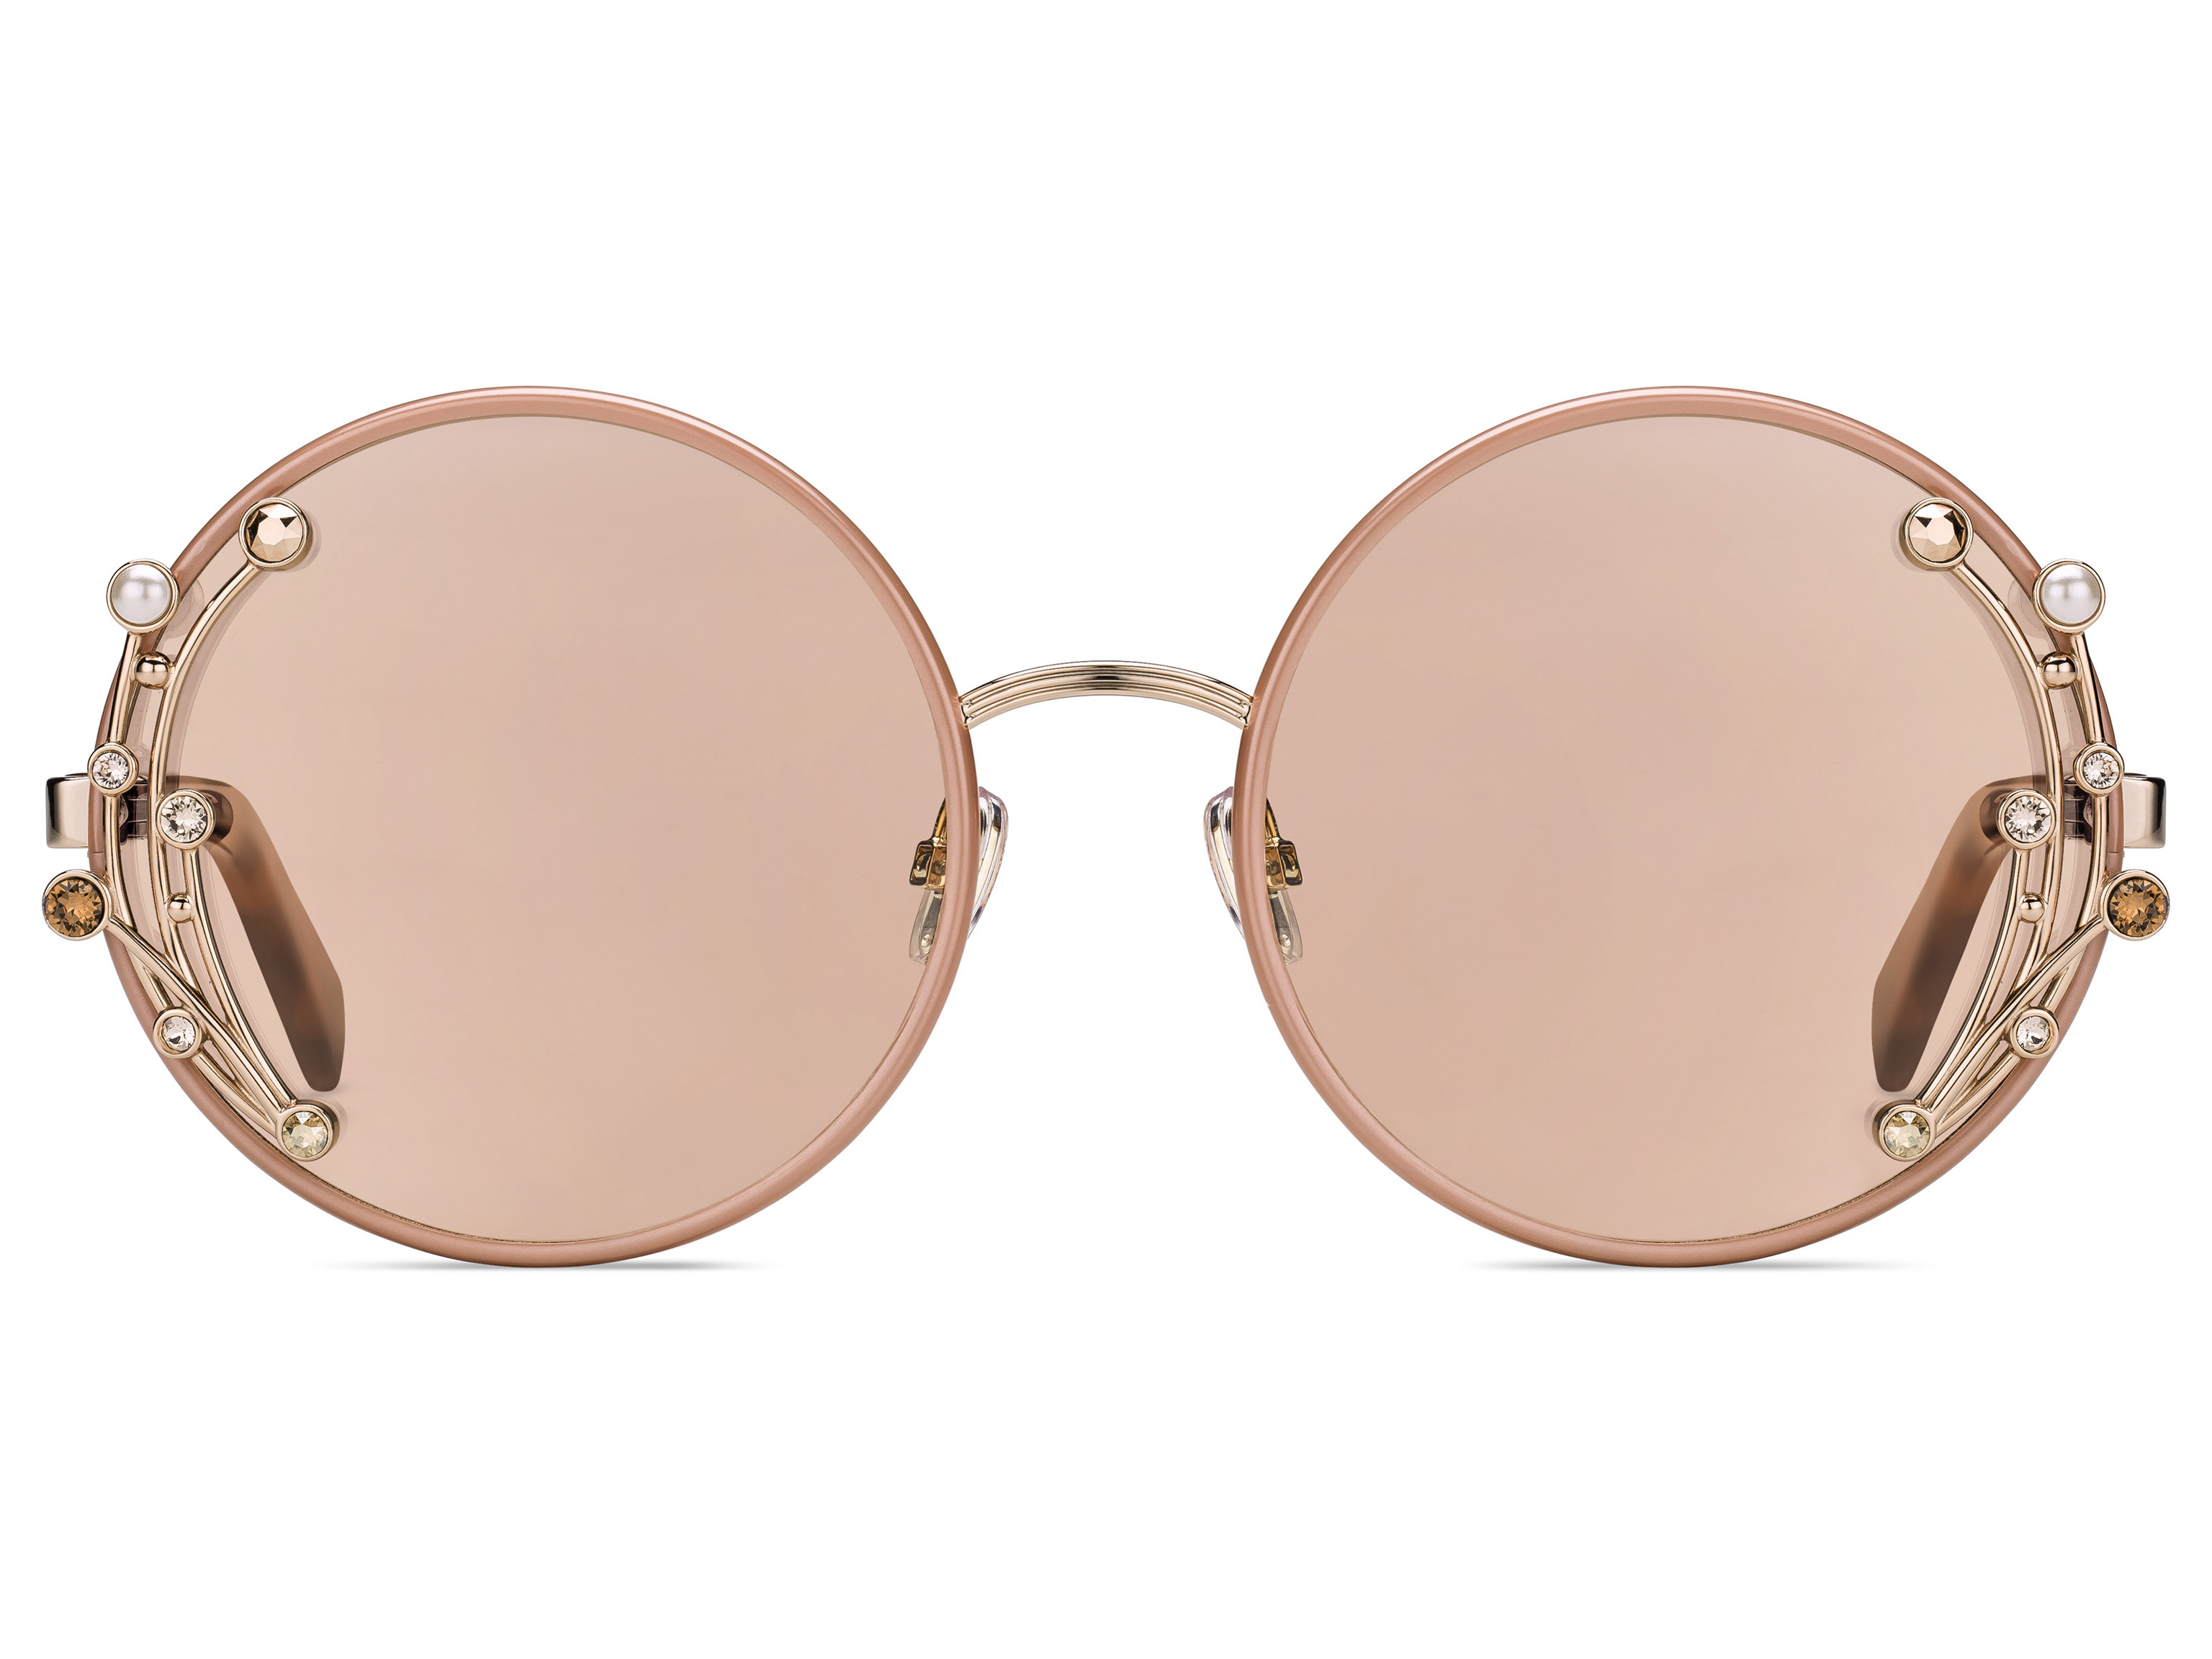 JIMMY CHOO INTRODUCES| LIMITED EDITION PAIR SUNGLASSES